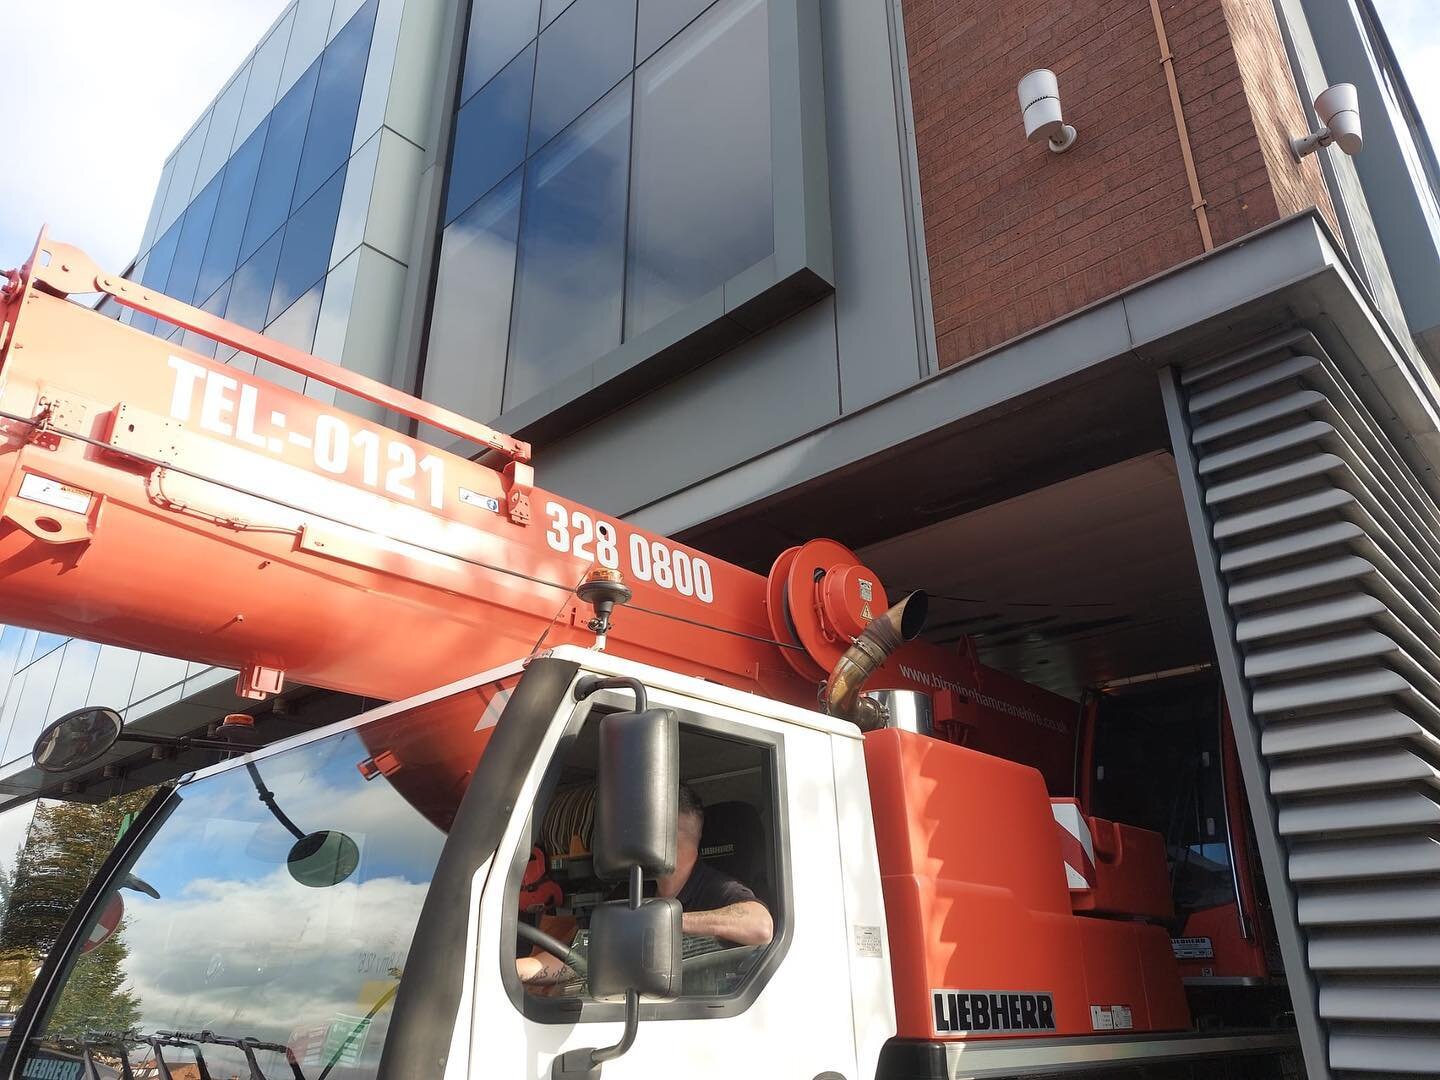 Measure, measure and measure again....A little extra work in the planning stage ensured that Saturday's contract lift was successfully delivered to the client #BCHC #contractlift #engineering #cranehire #LTM1060 #solihull #birminghamcranehire